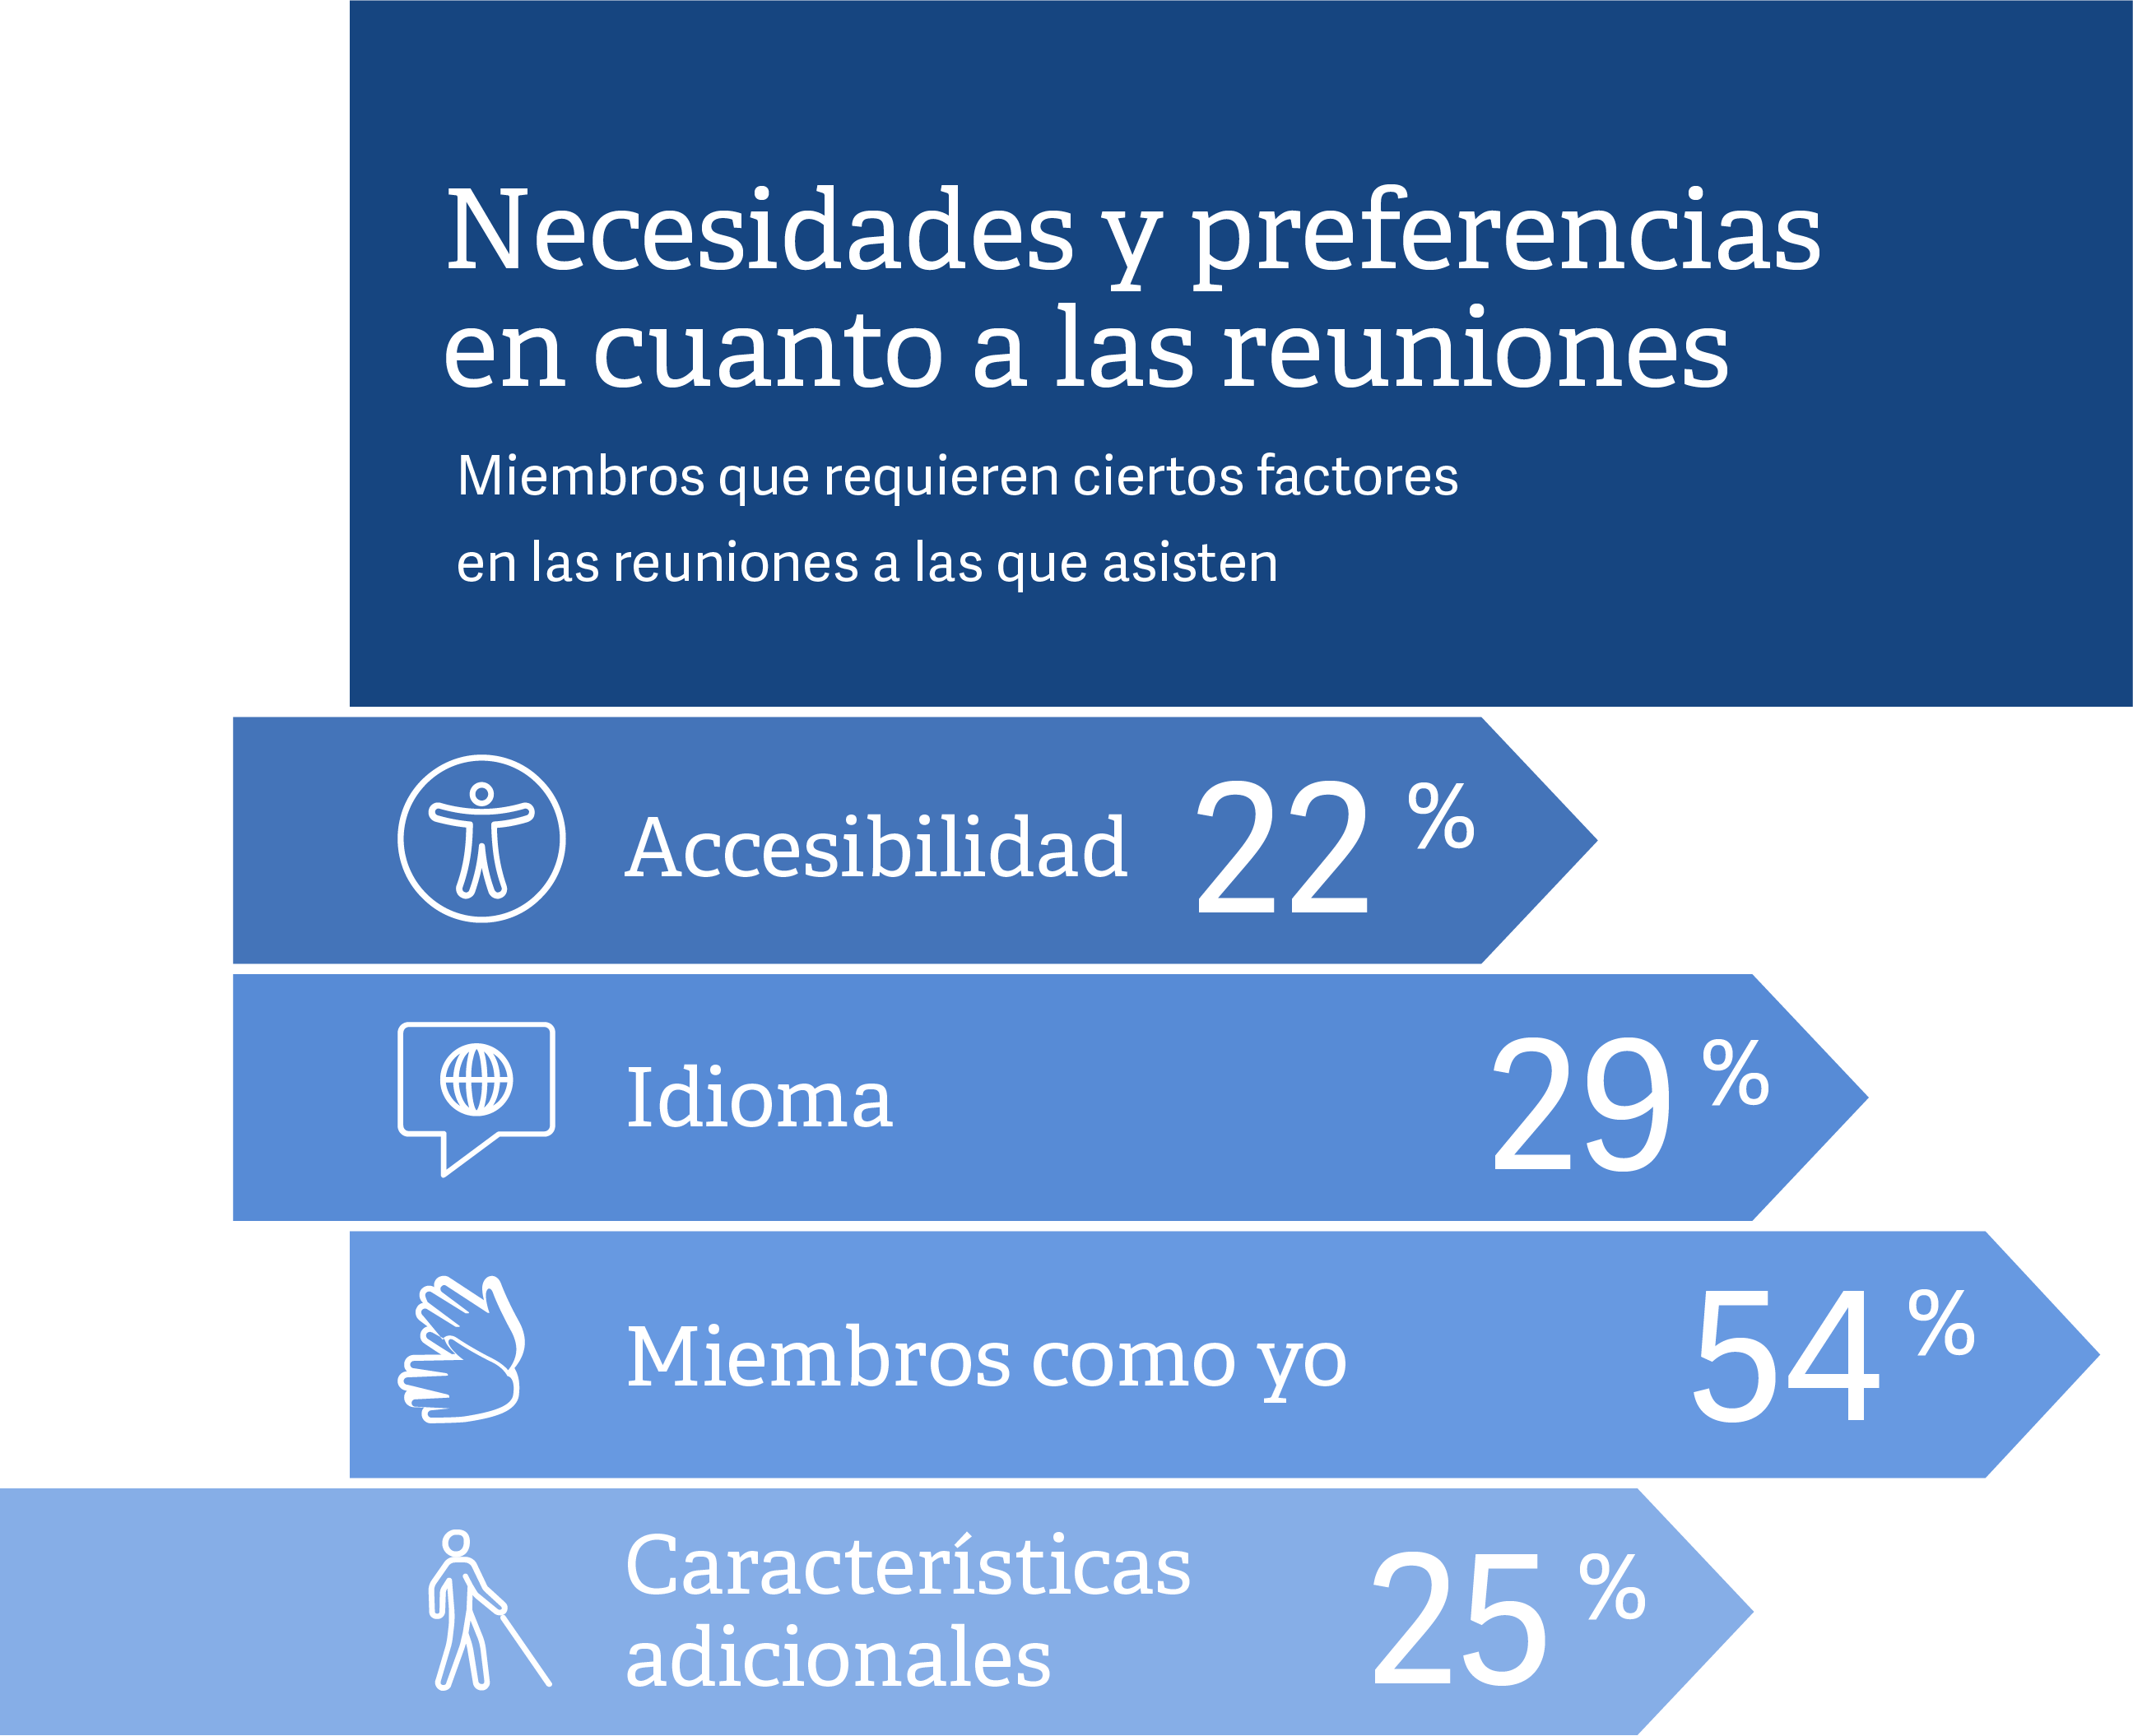 meeting preferences infographic 2023 mobile spanish image graphic